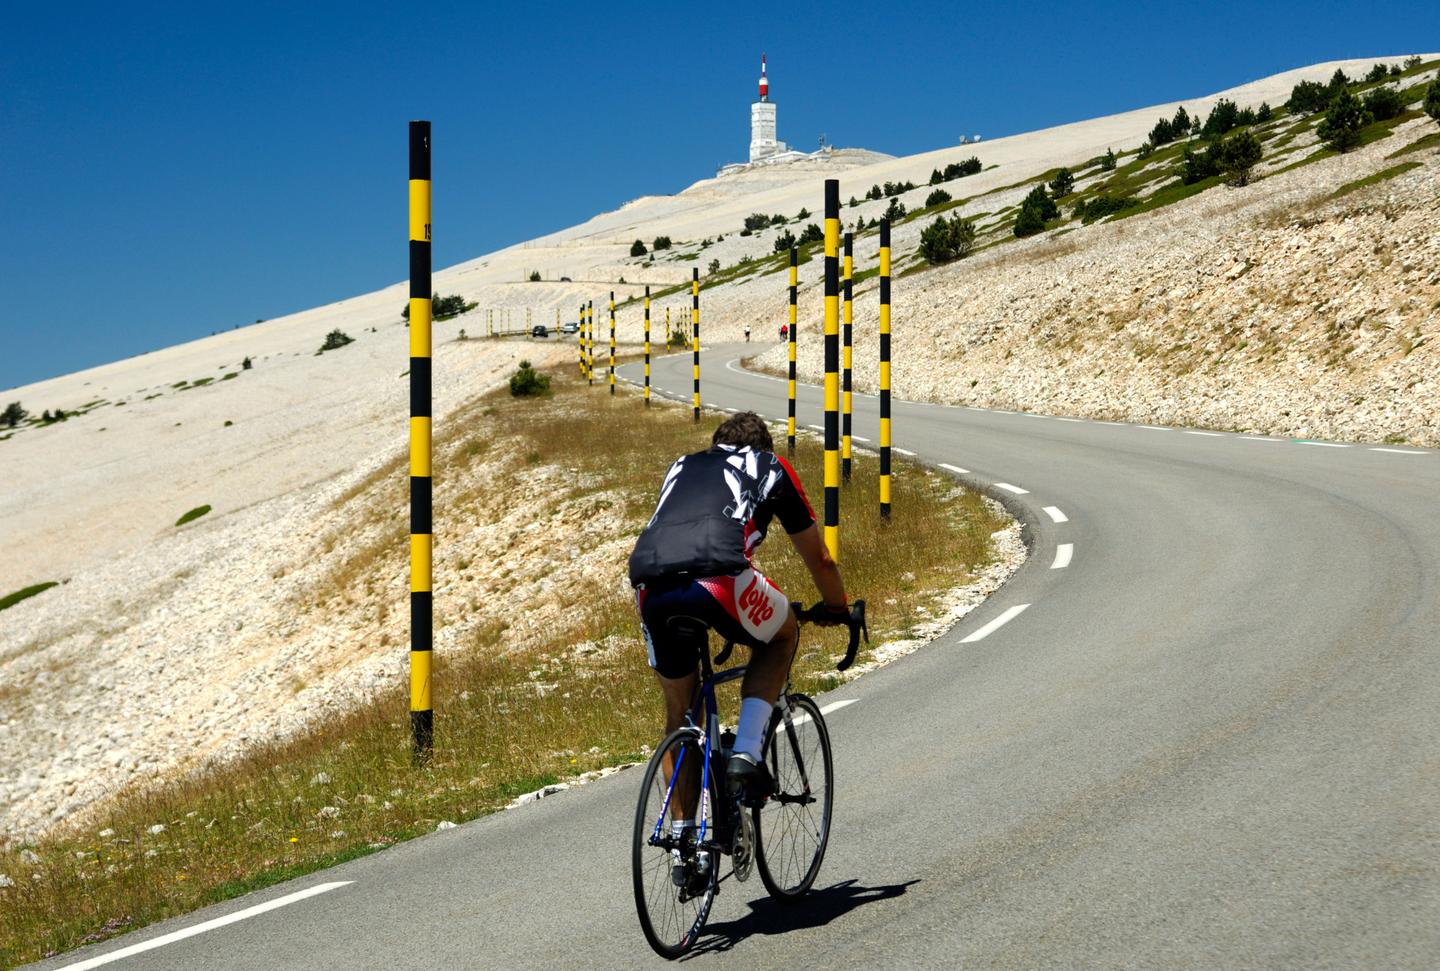 Cyclist ascending Mont Ventoux with a view of the iconic summit tower in the background.